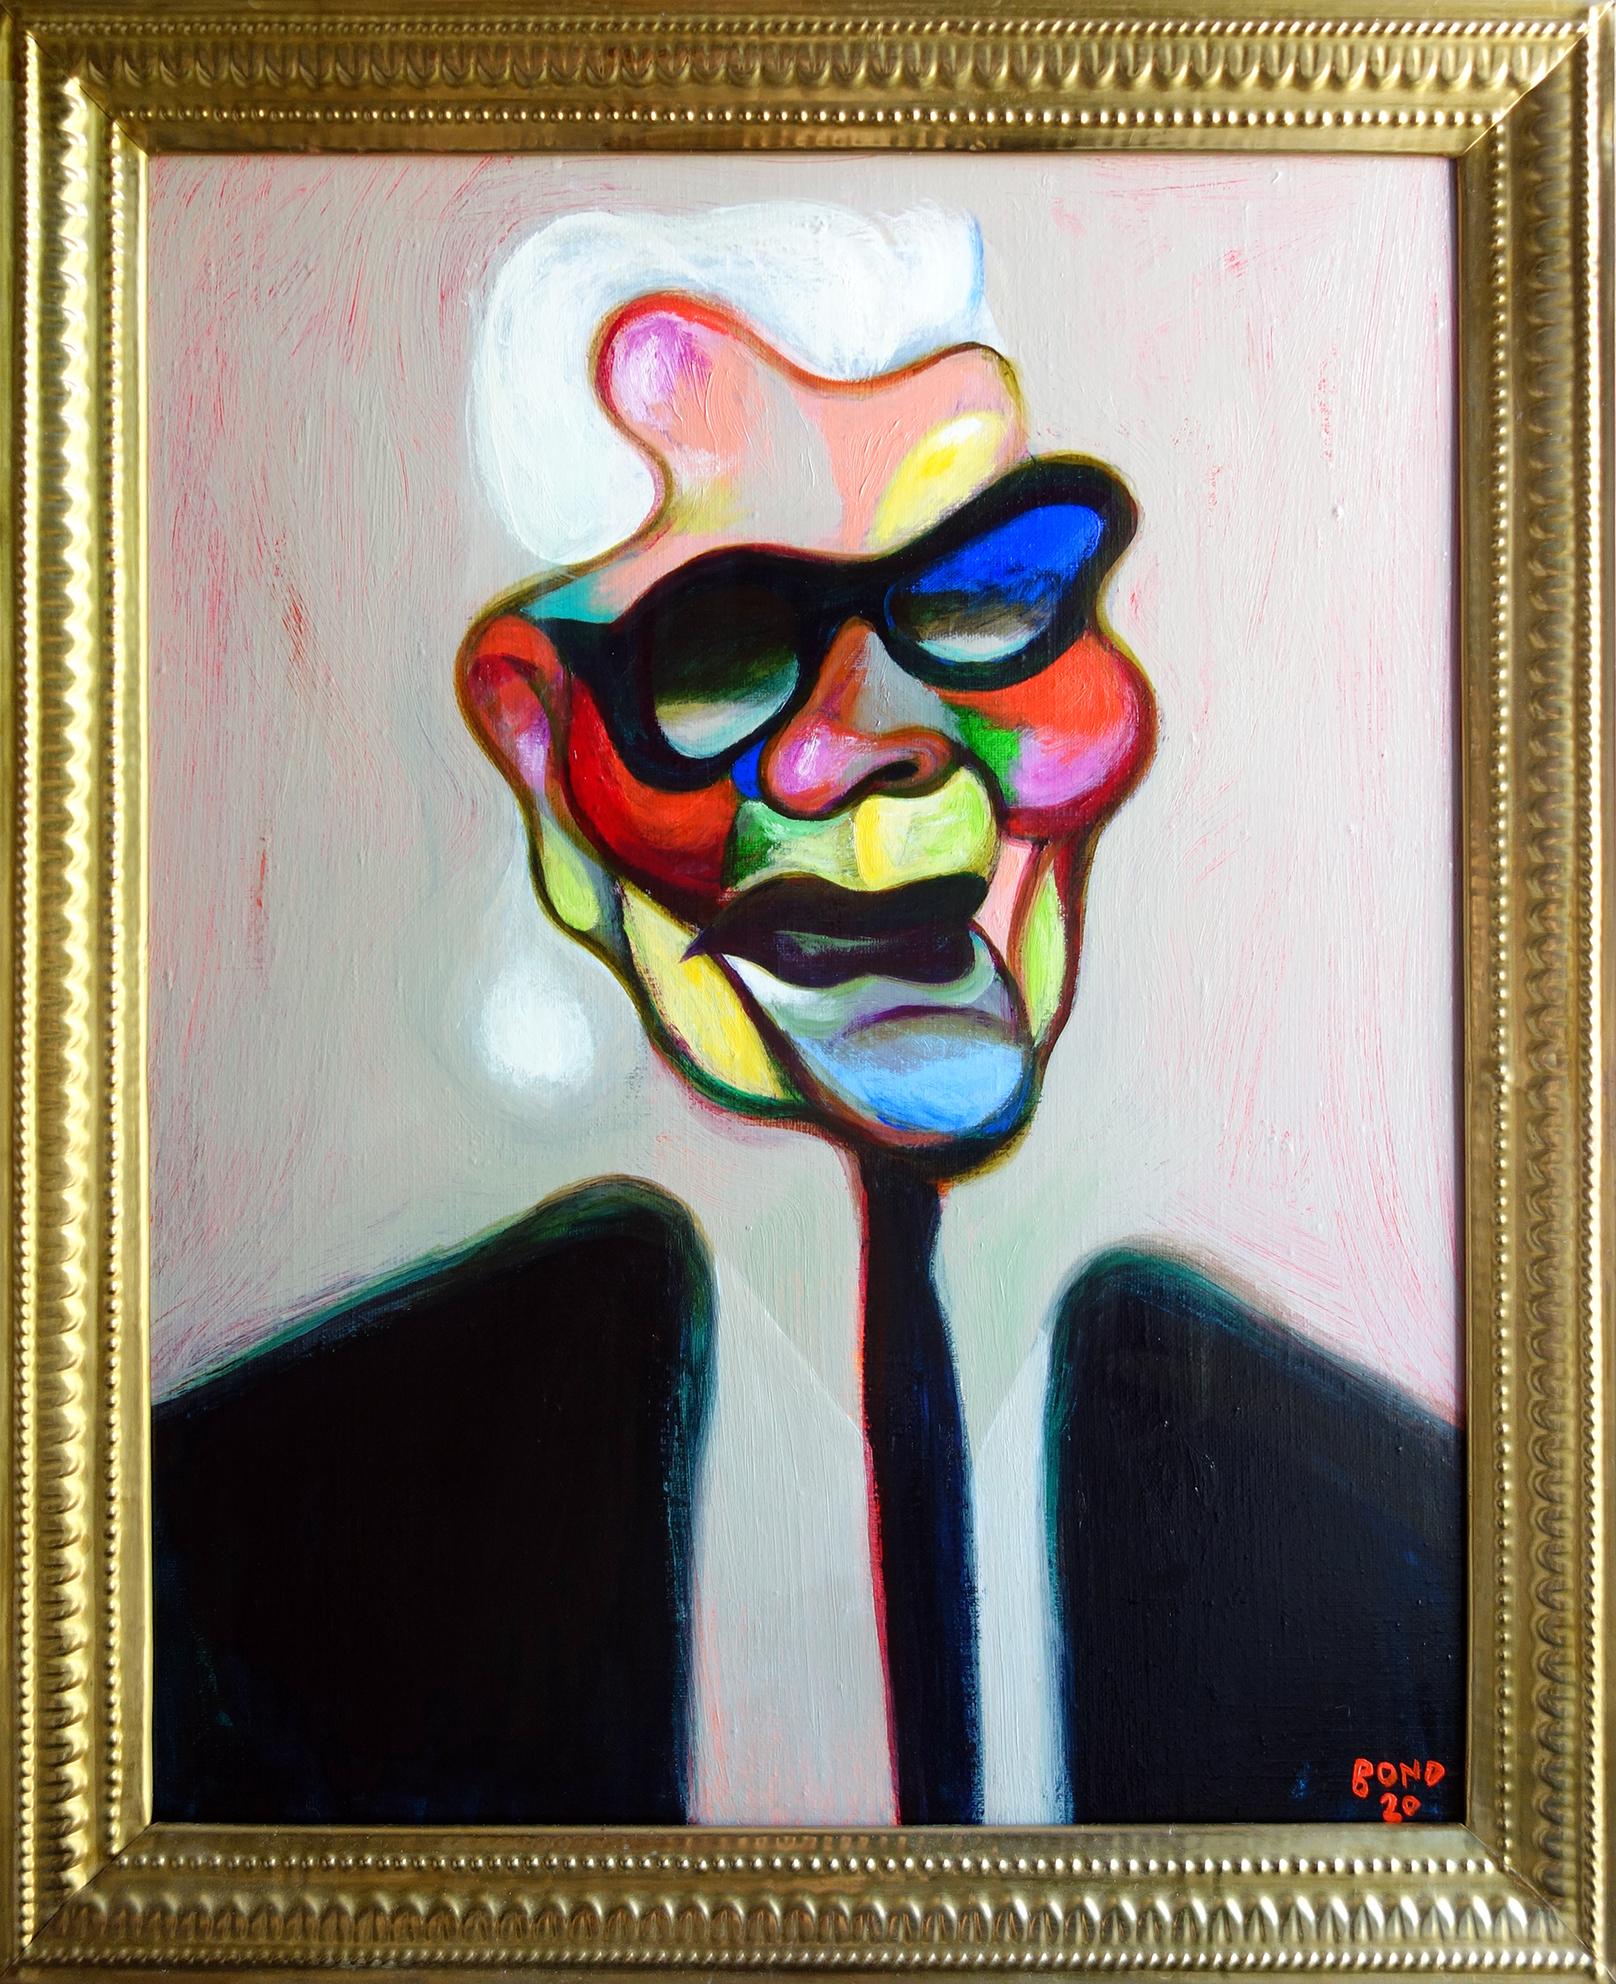 Karl - Portrait Painting Acrylic Colors White Red Blue Black Yellow Pink  1